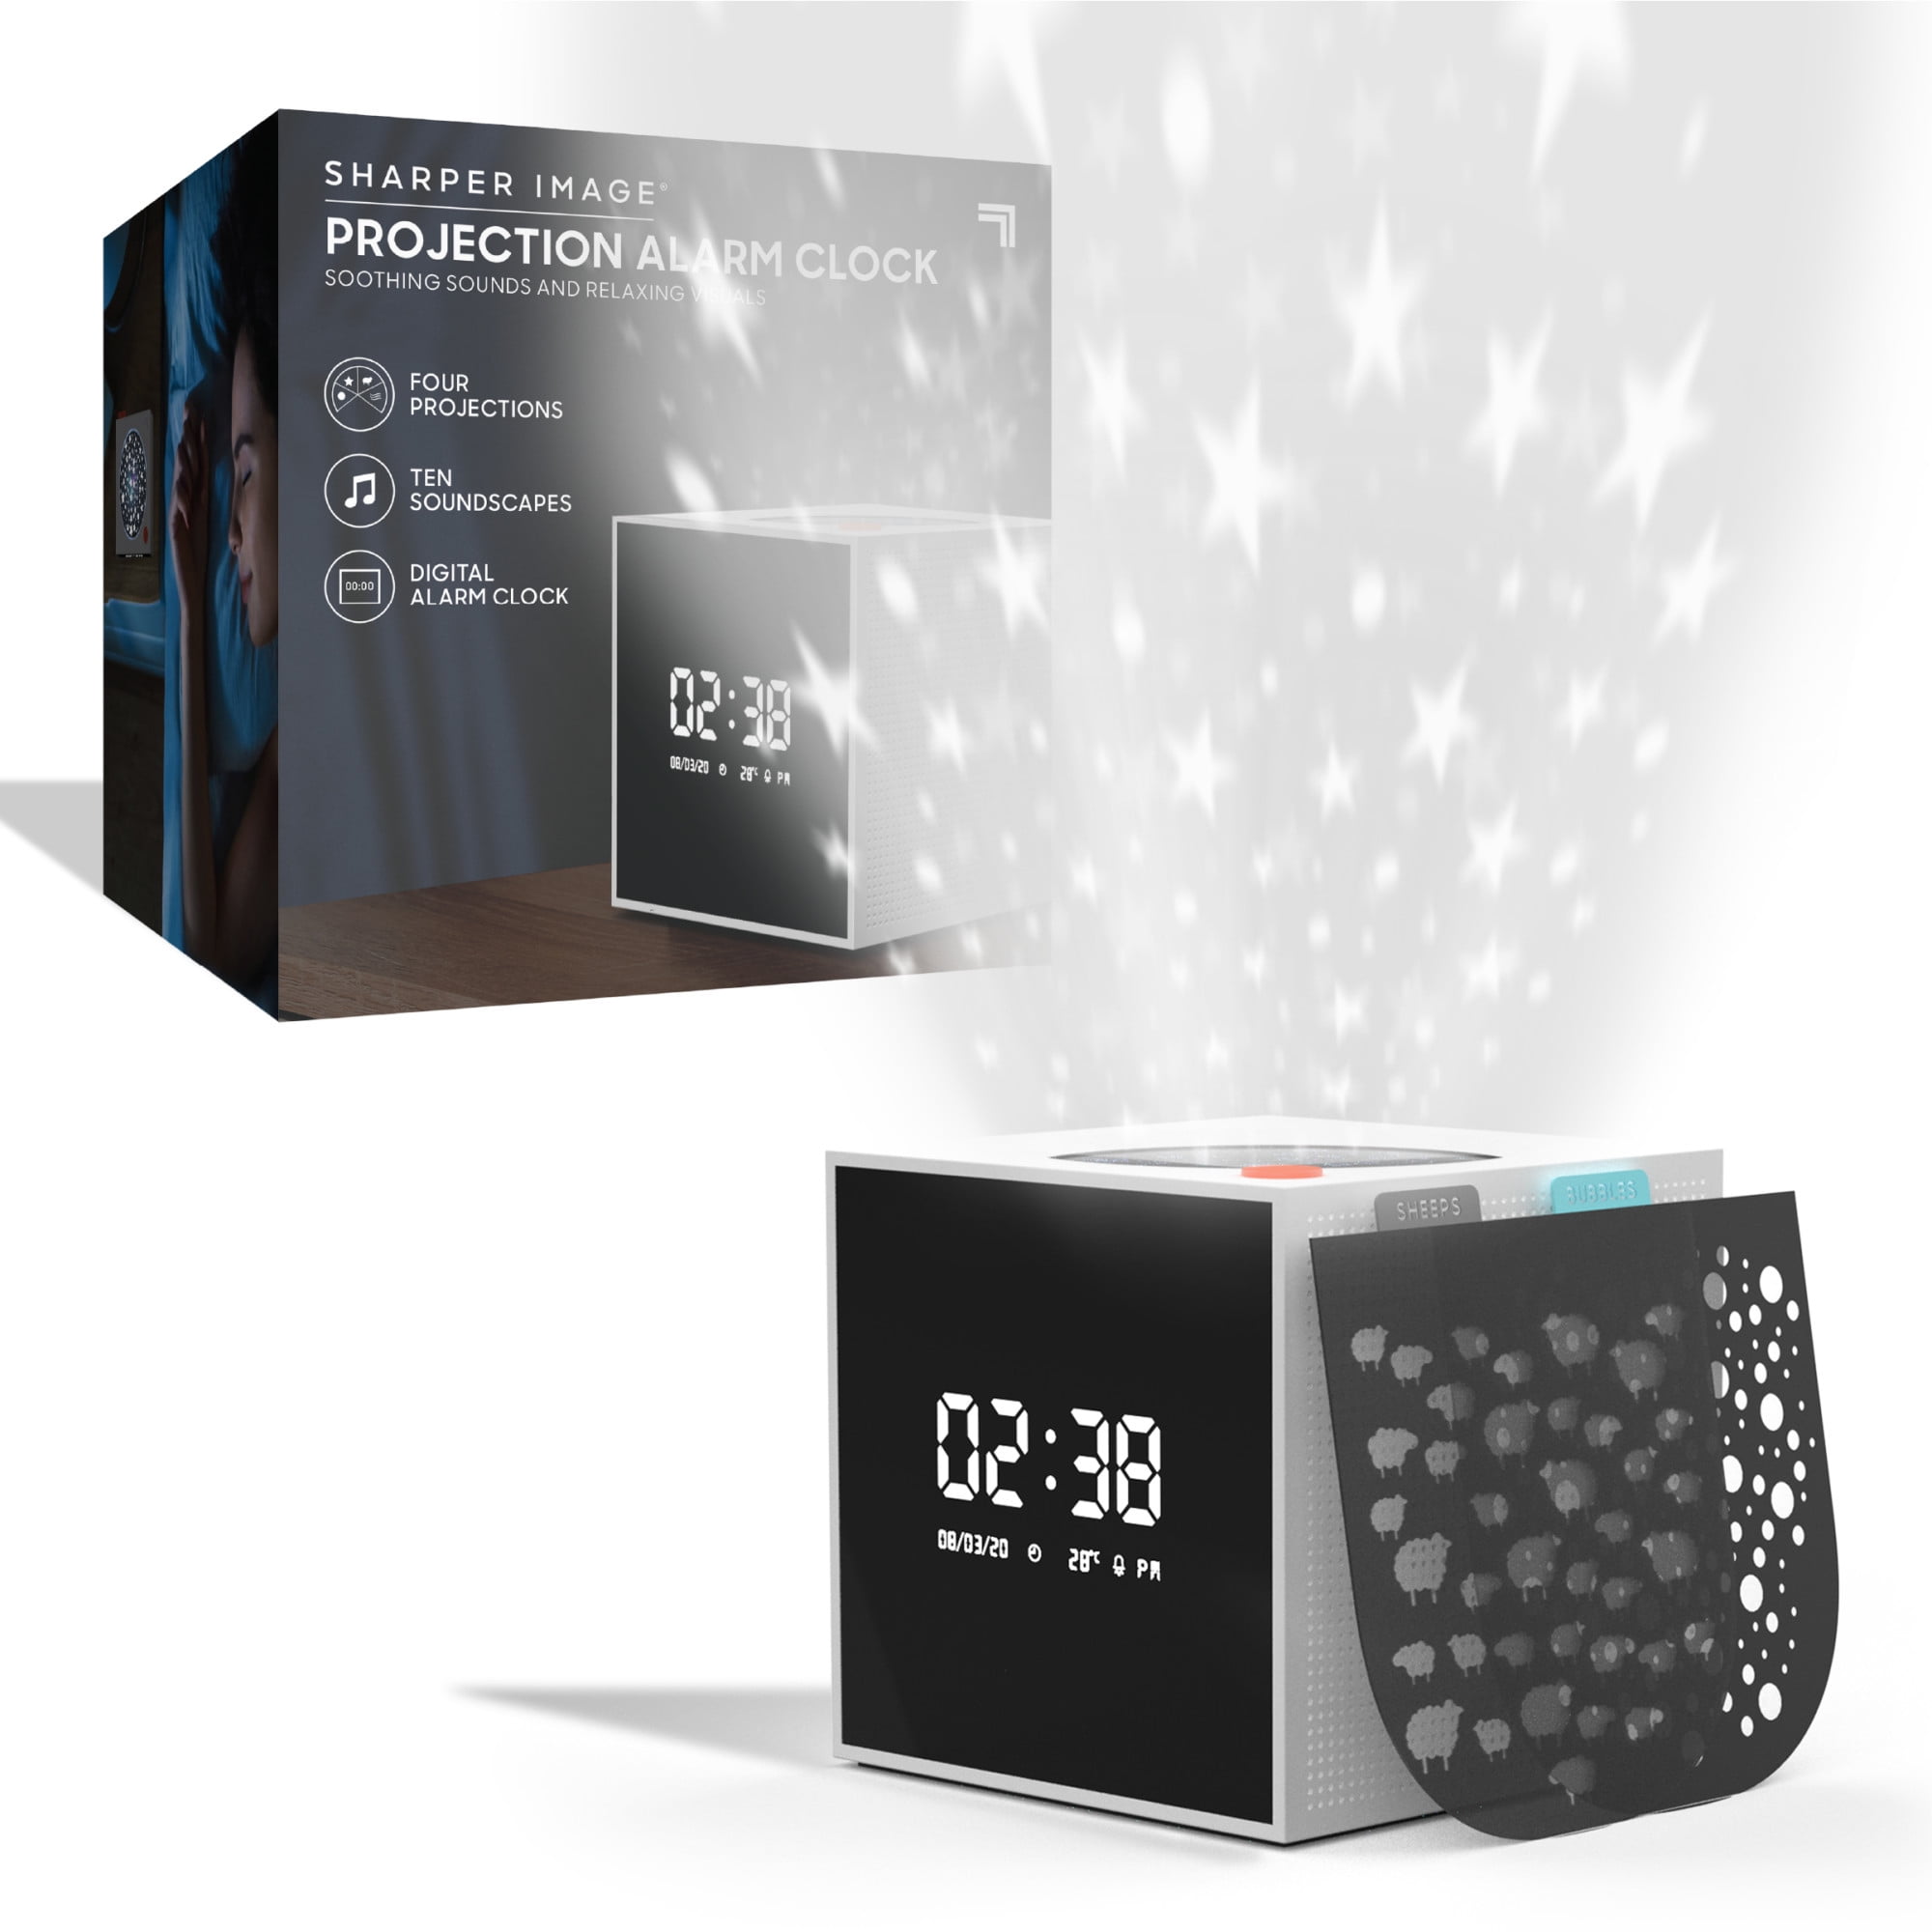 Sharper Image® Projection Alarm Clock With Soothing Sounds and Relaxing Visuals, 4 Projections & 10 Soothing Soundscapes, Full-Function Digital Alarm Clock, Project Color-Changing Stars